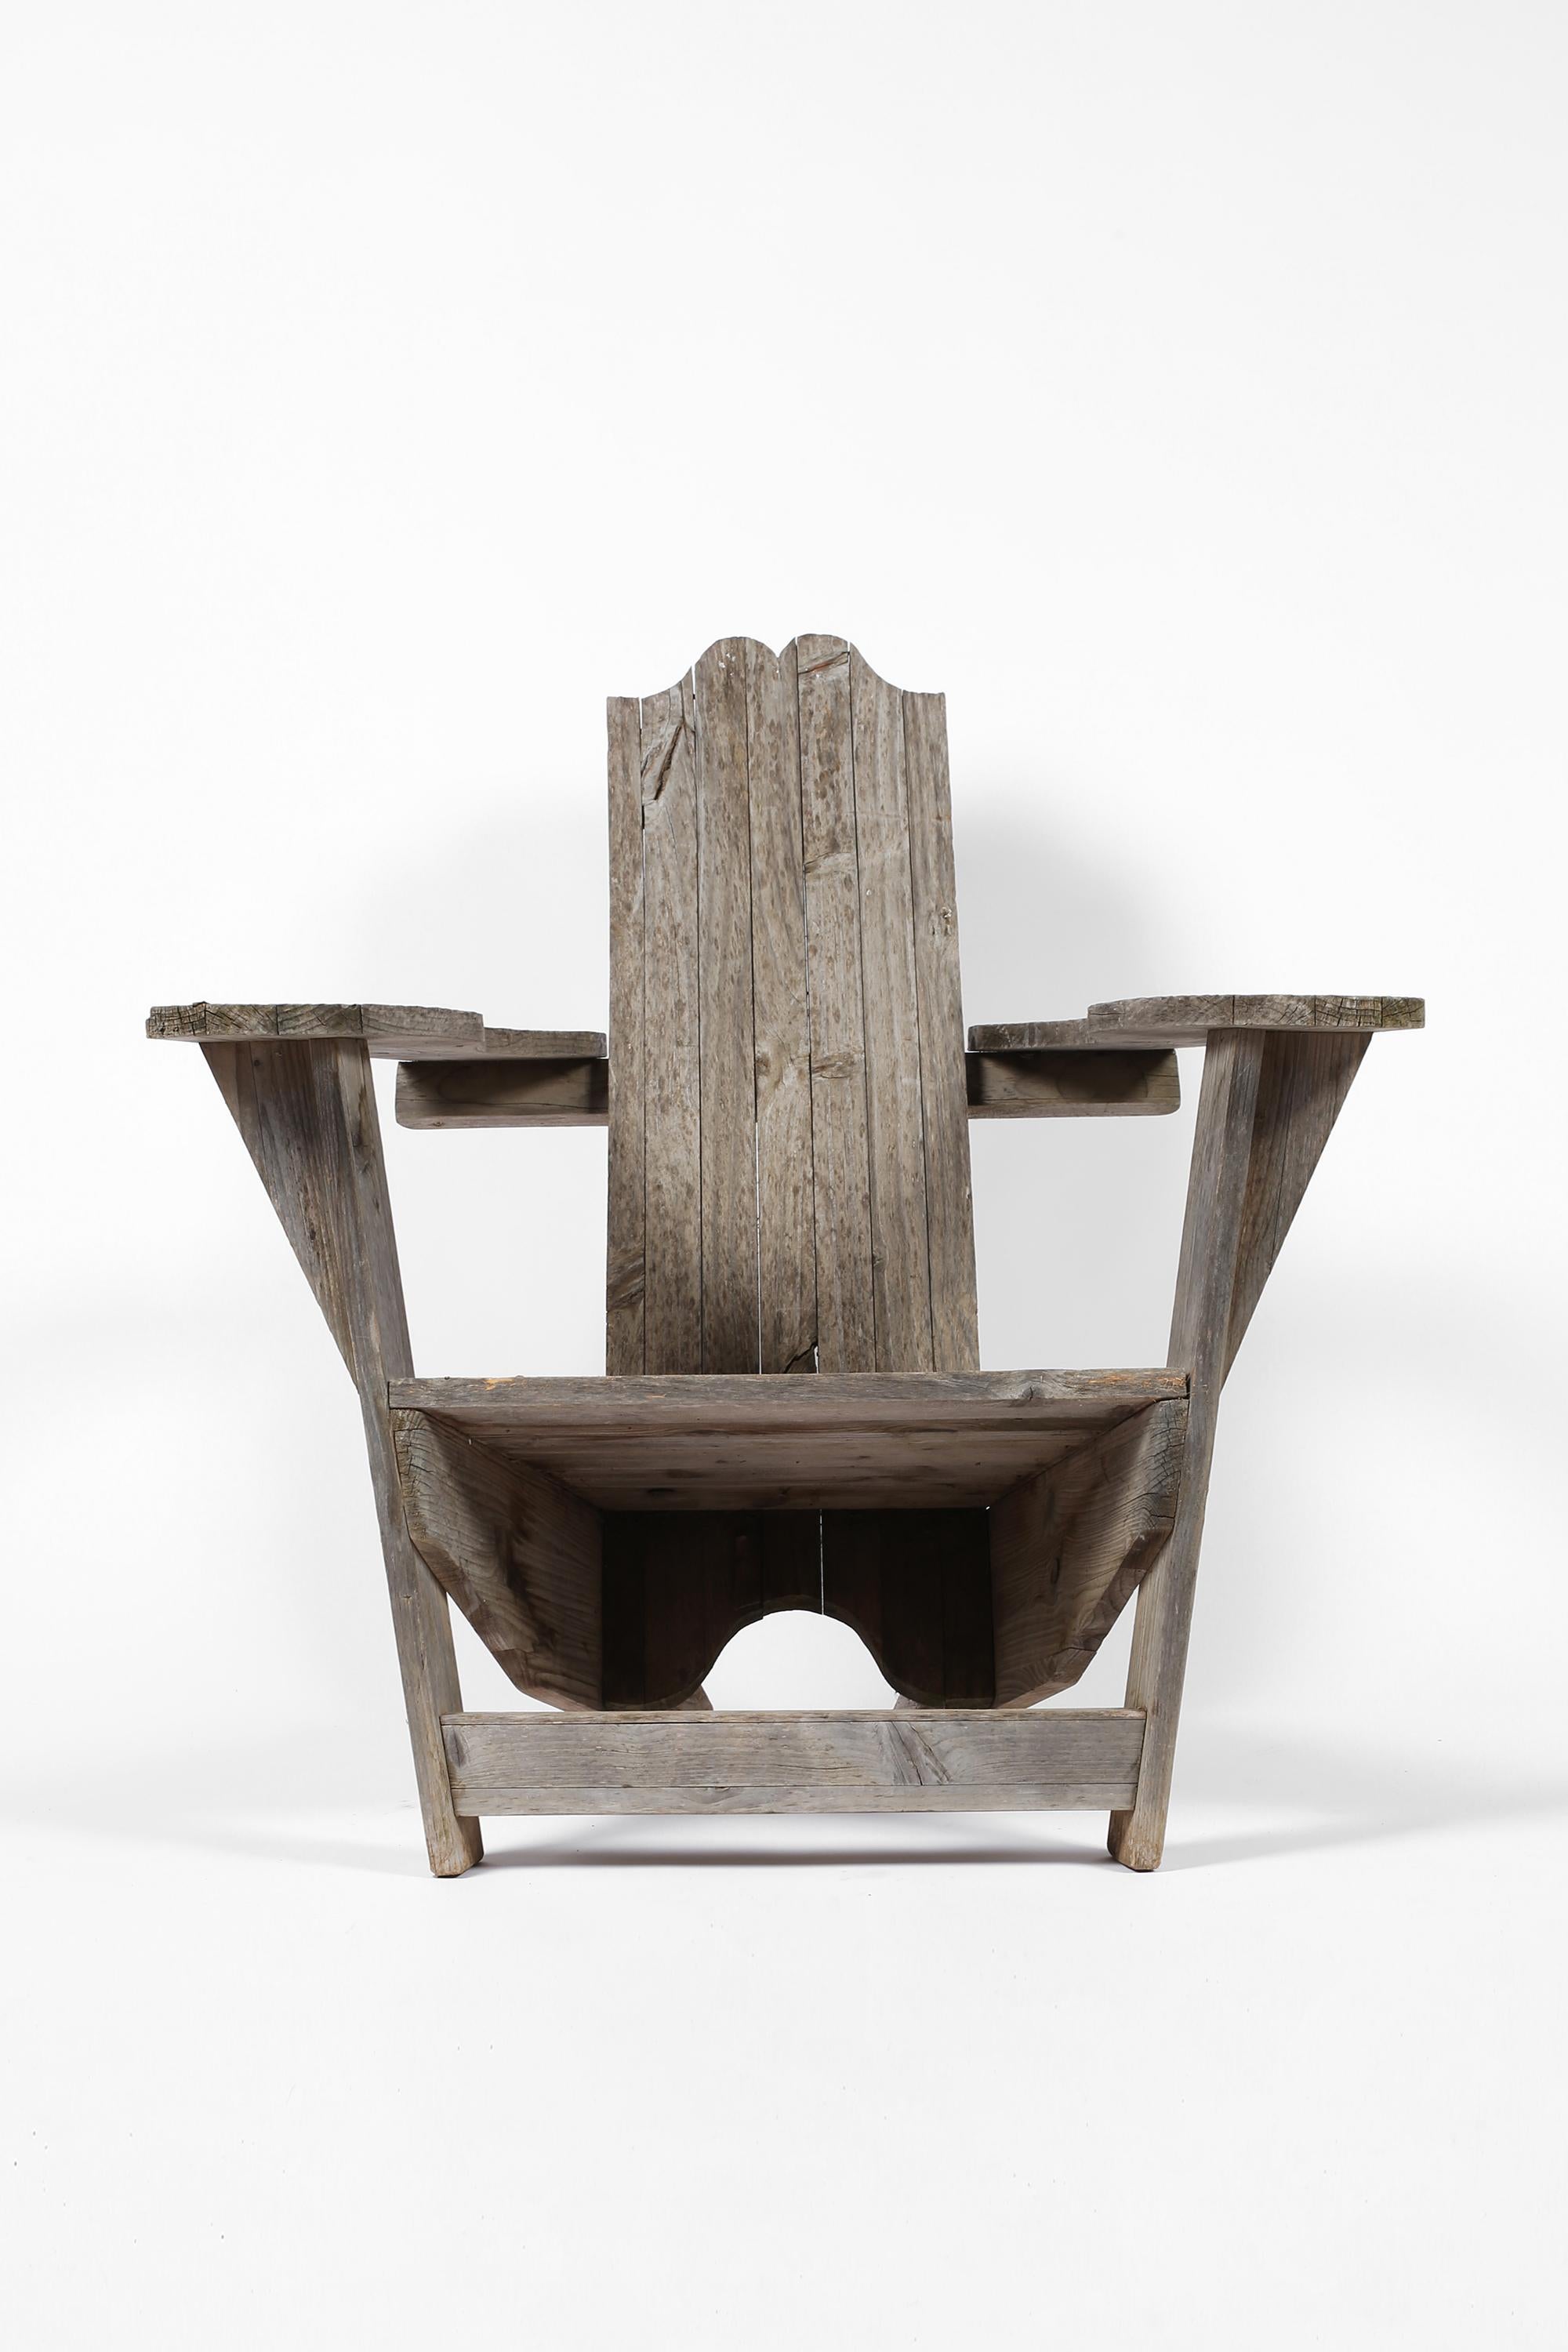 A large and sculptural ‘Adirondack’ or ‘Westport’ style armchair in heavily weathered pine timber. Originating from northern Spain, c. late 20th century.